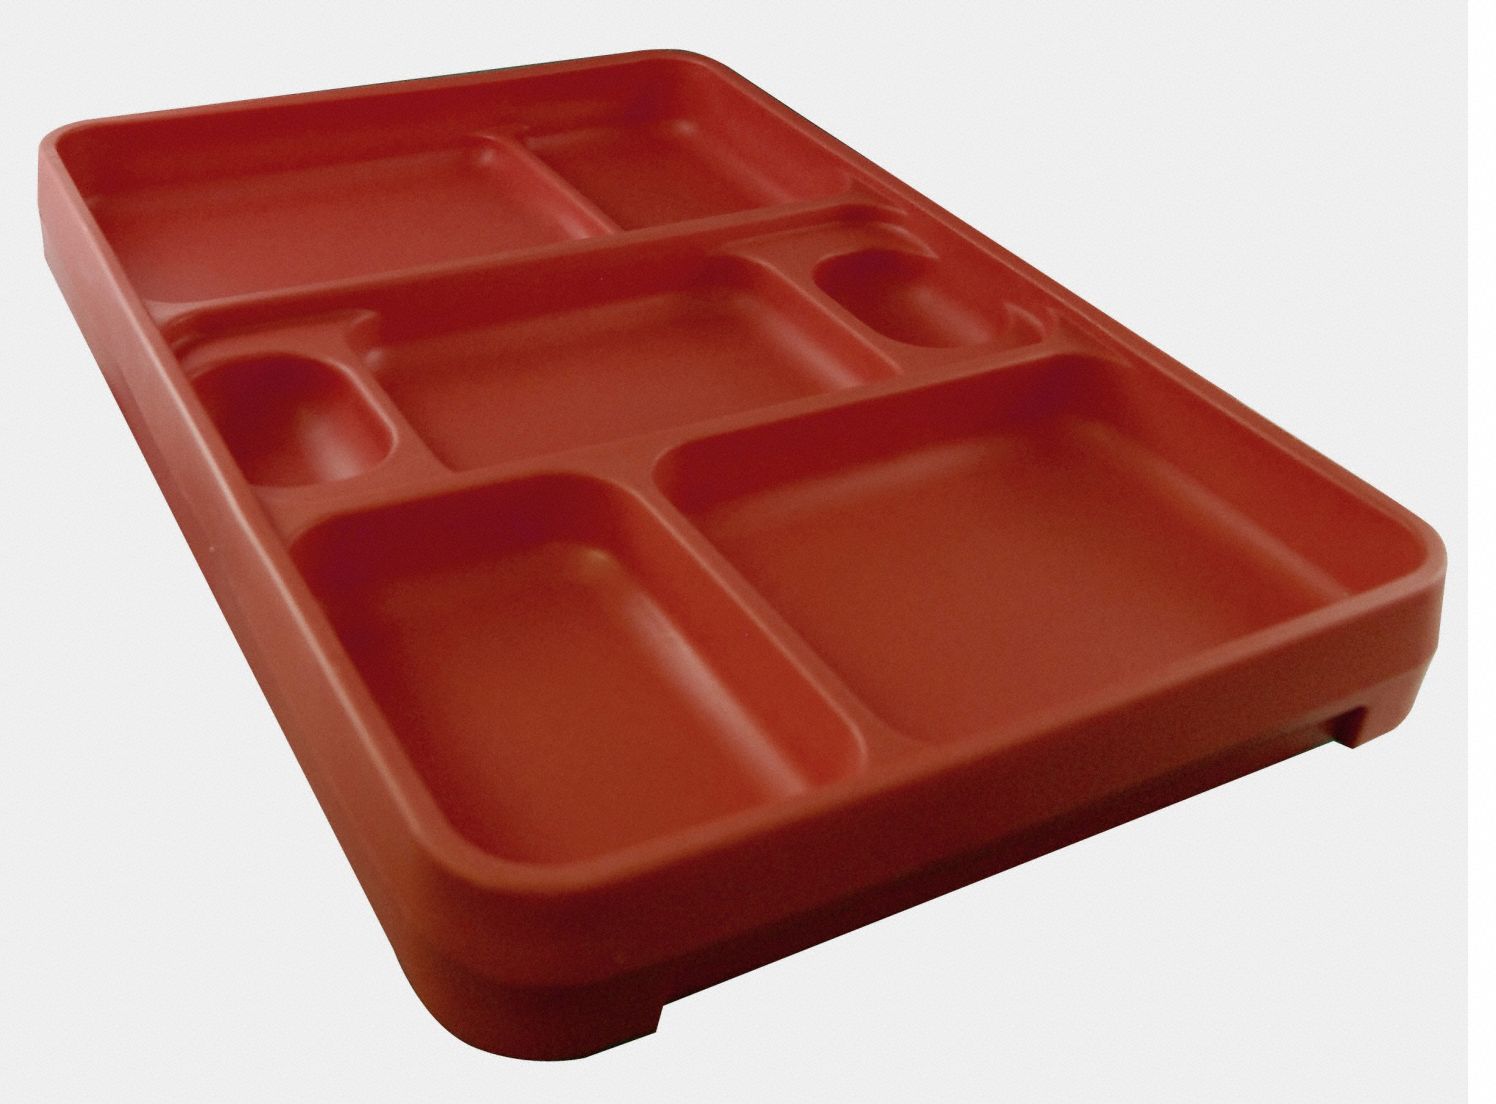 Rock 2.0 Food Trays Terra Cotta: w/ Compartments, 14 1/4 in Overall Lg, Terra Cotta, 10 PK